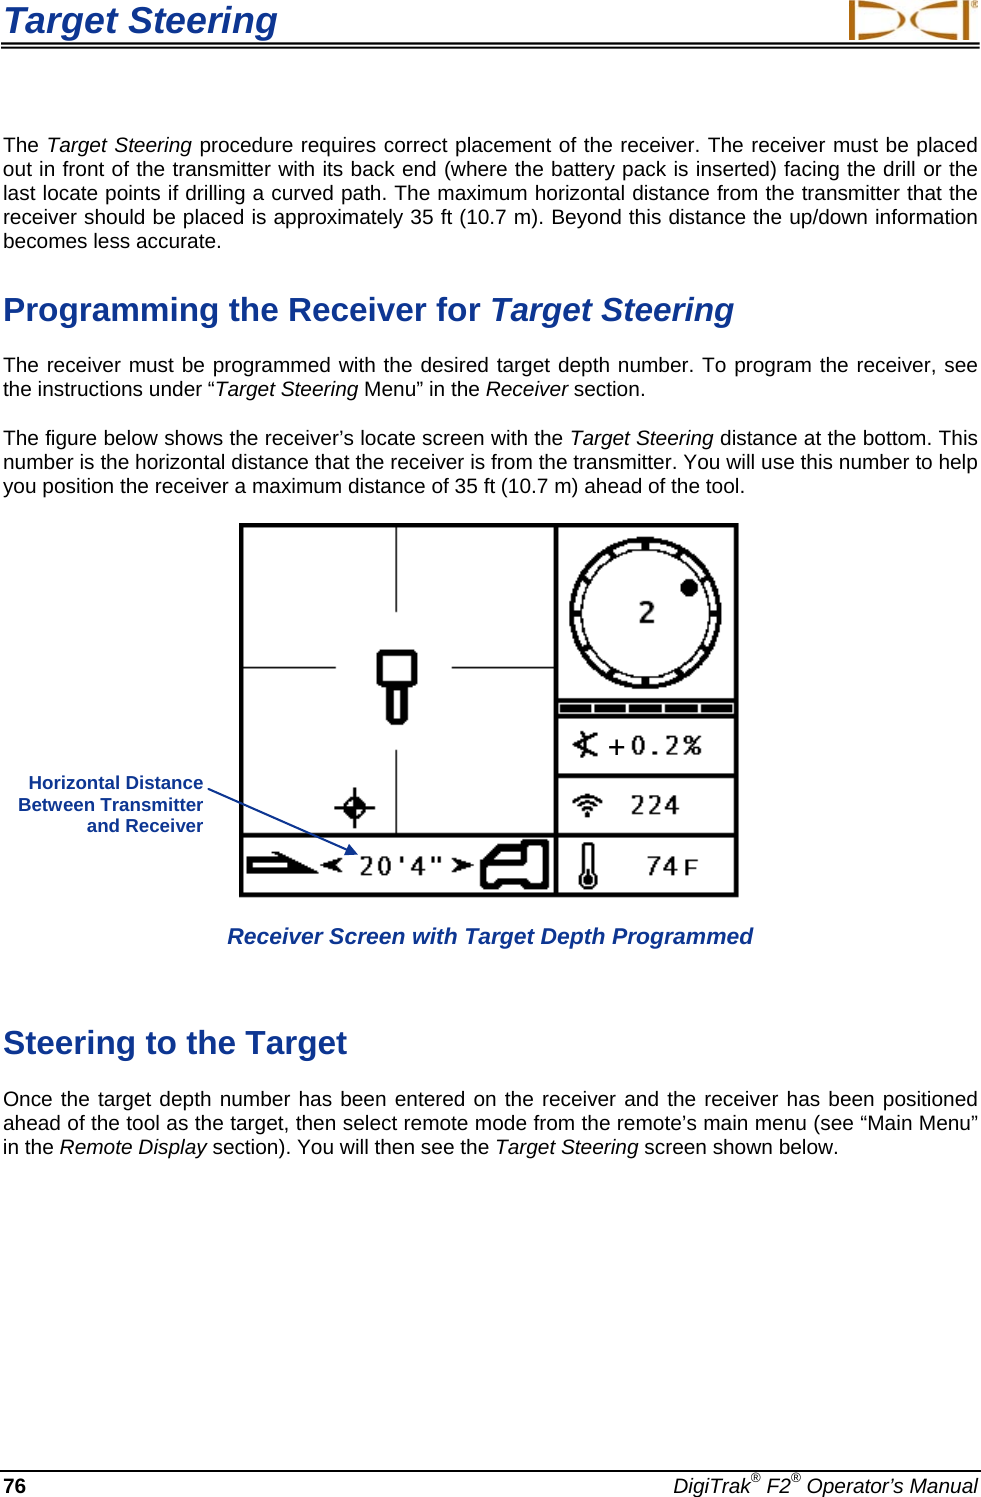 Target Steering     76 DigiTrak® F2® Operator’s Manual The Target Steering procedure requires correct placement of the receiver. The receiver must be placed out in front of the transmitter with its back end (where the battery pack is inserted) facing the drill or the last locate points if drilling a curved path. The maximum horizontal distance from the transmitter that the receiver should be placed is approximately 35 ft (10.7 m). Beyond this distance the up/down information becomes less accurate. Programming the Receiver for Target Steering The receiver must be programmed with the desired target depth number. To program the receiver, see the instructions under “Target Steering Menu” in the Receiver section. The figure below shows the receiver’s locate screen with the Target Steering distance at the bottom. This number is the horizontal distance that the receiver is from the transmitter. You will use this number to help you position the receiver a maximum distance of 35 ft (10.7 m) ahead of the tool.   Receiver Screen with Target Depth Programmed  Steering to the Target Once the target depth number has been entered on the receiver and the receiver has been positioned ahead of the tool as the target, then select remote mode from the remote’s main menu (see “Main Menu” in the Remote Display section). You will then see the Target Steering screen shown below.   Horizontal Distance Between Transmitter and Receiver  + 